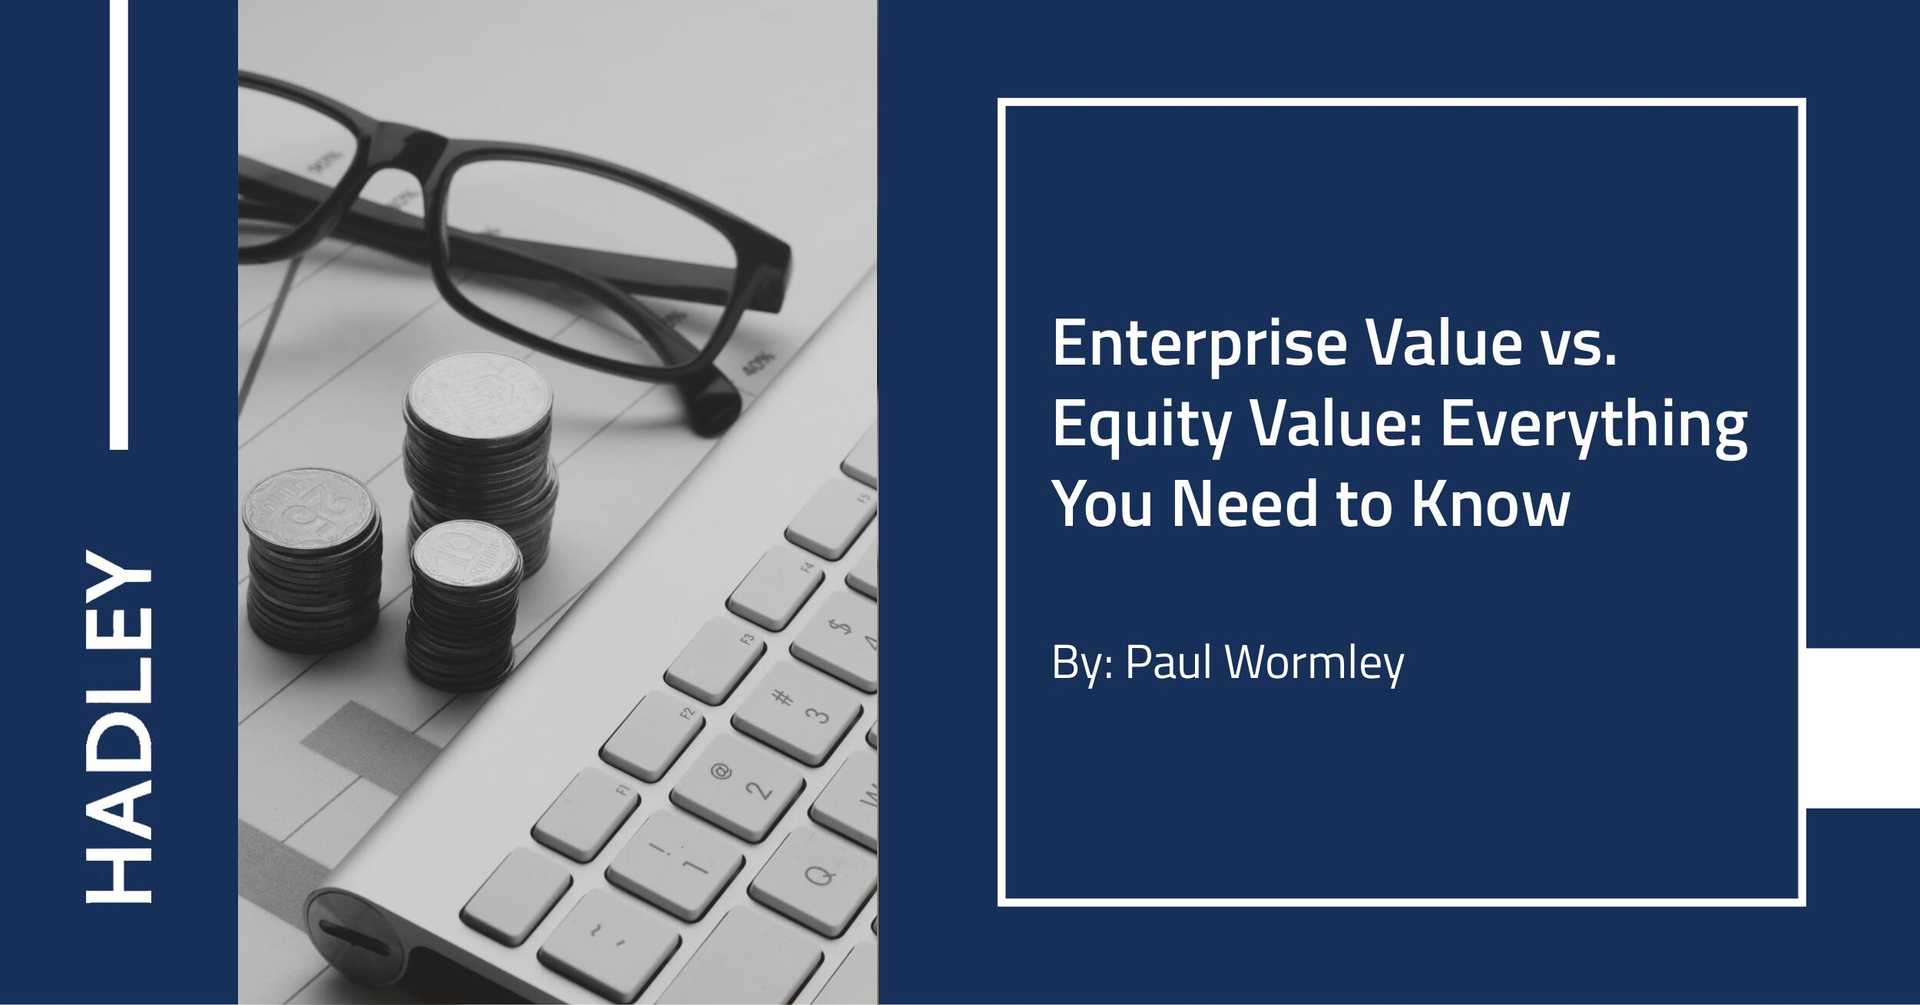 Enterprise Value vs. Equity Value: Everything You Need to Know